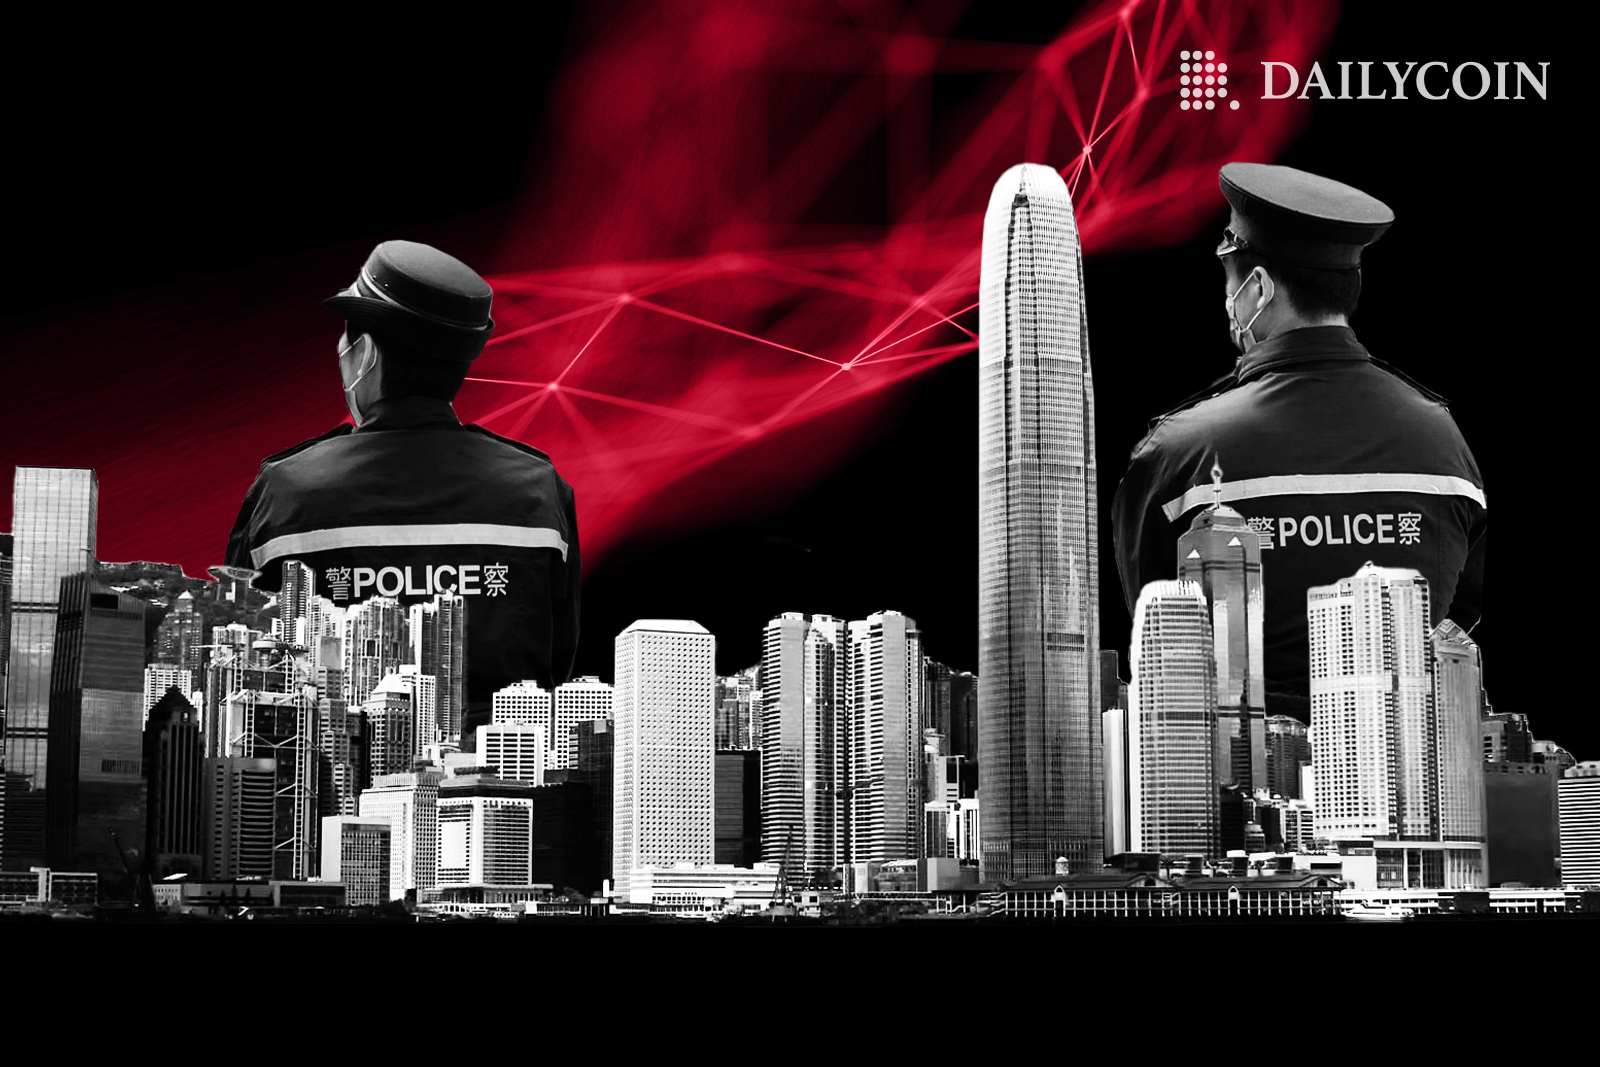 Police guarding miniature version of Hong Kong on a background with blockchain technology